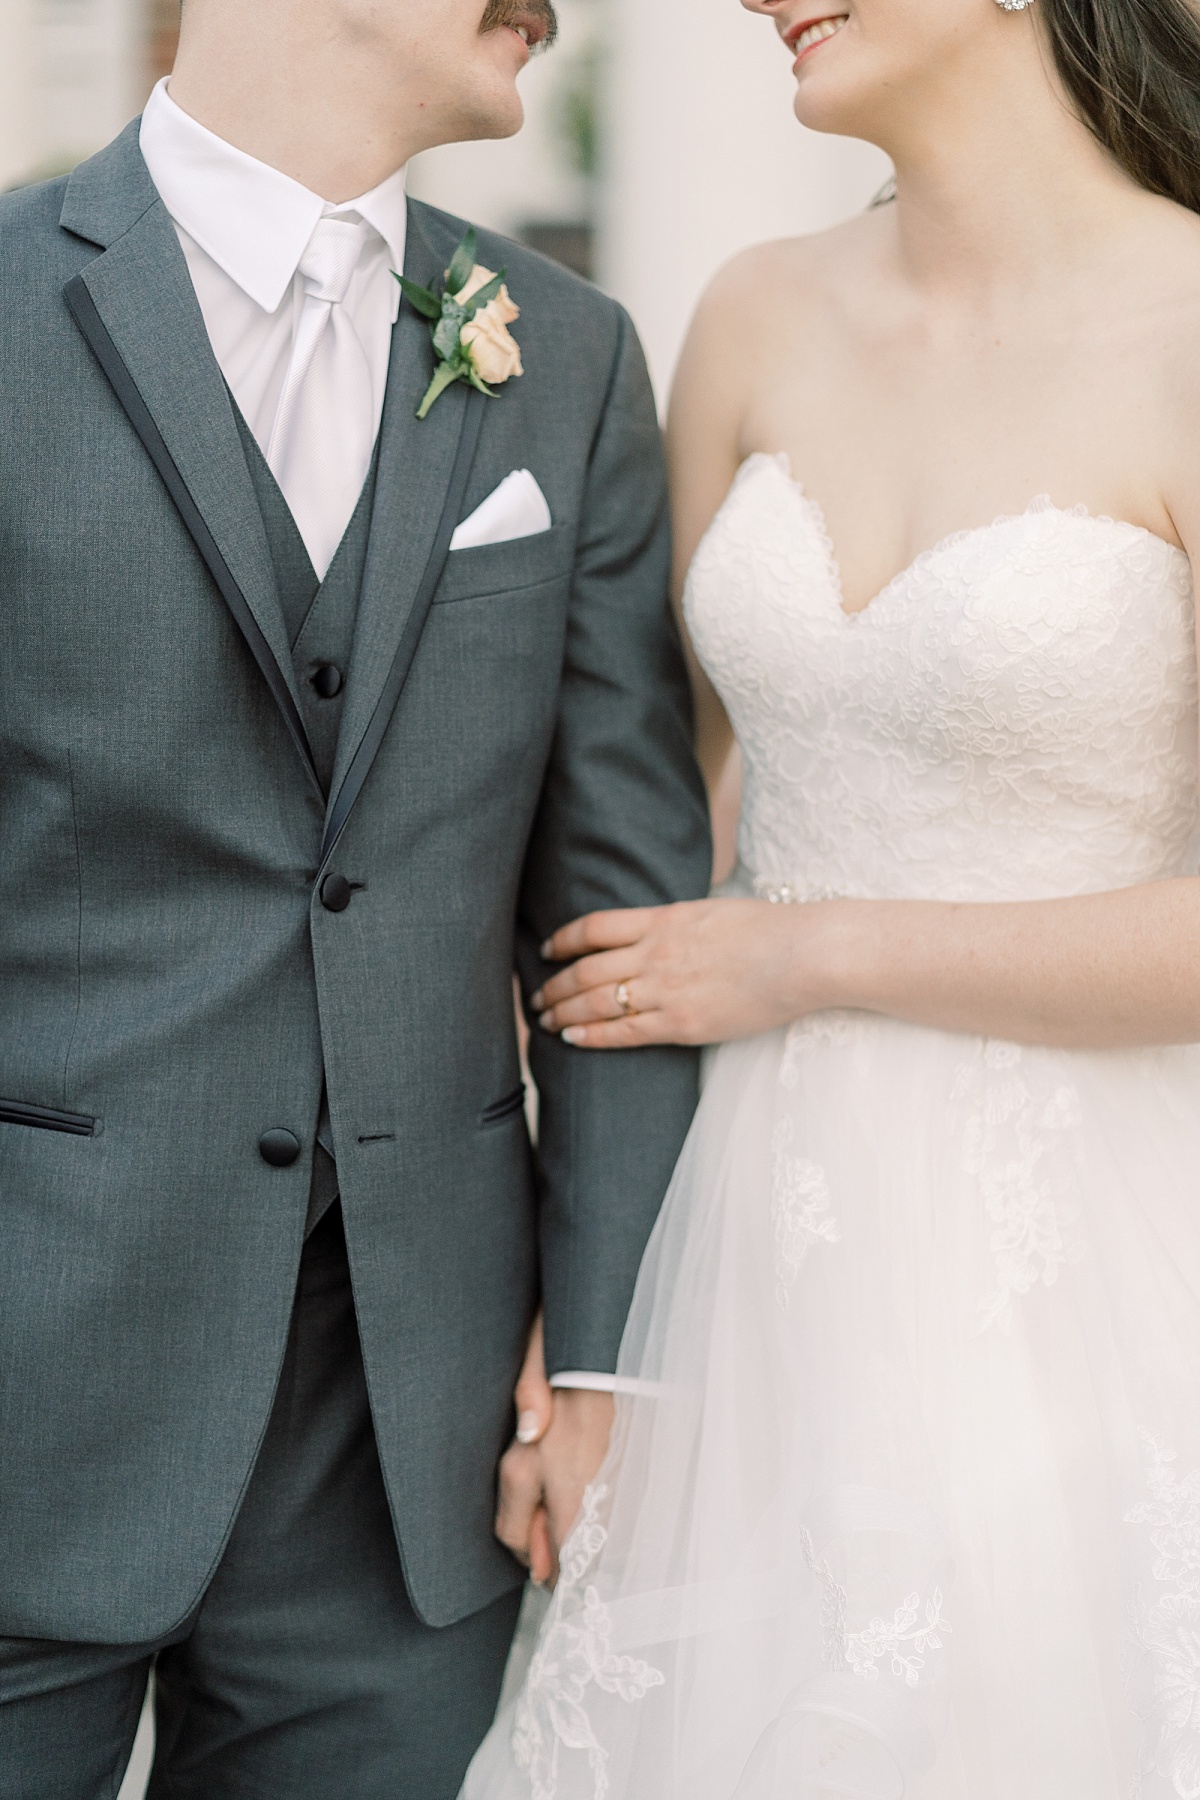 A close up image of a bride in a white dress and groom in a gray tux holding hands and smiling at each other for wedding photographer in Austin, Texas.